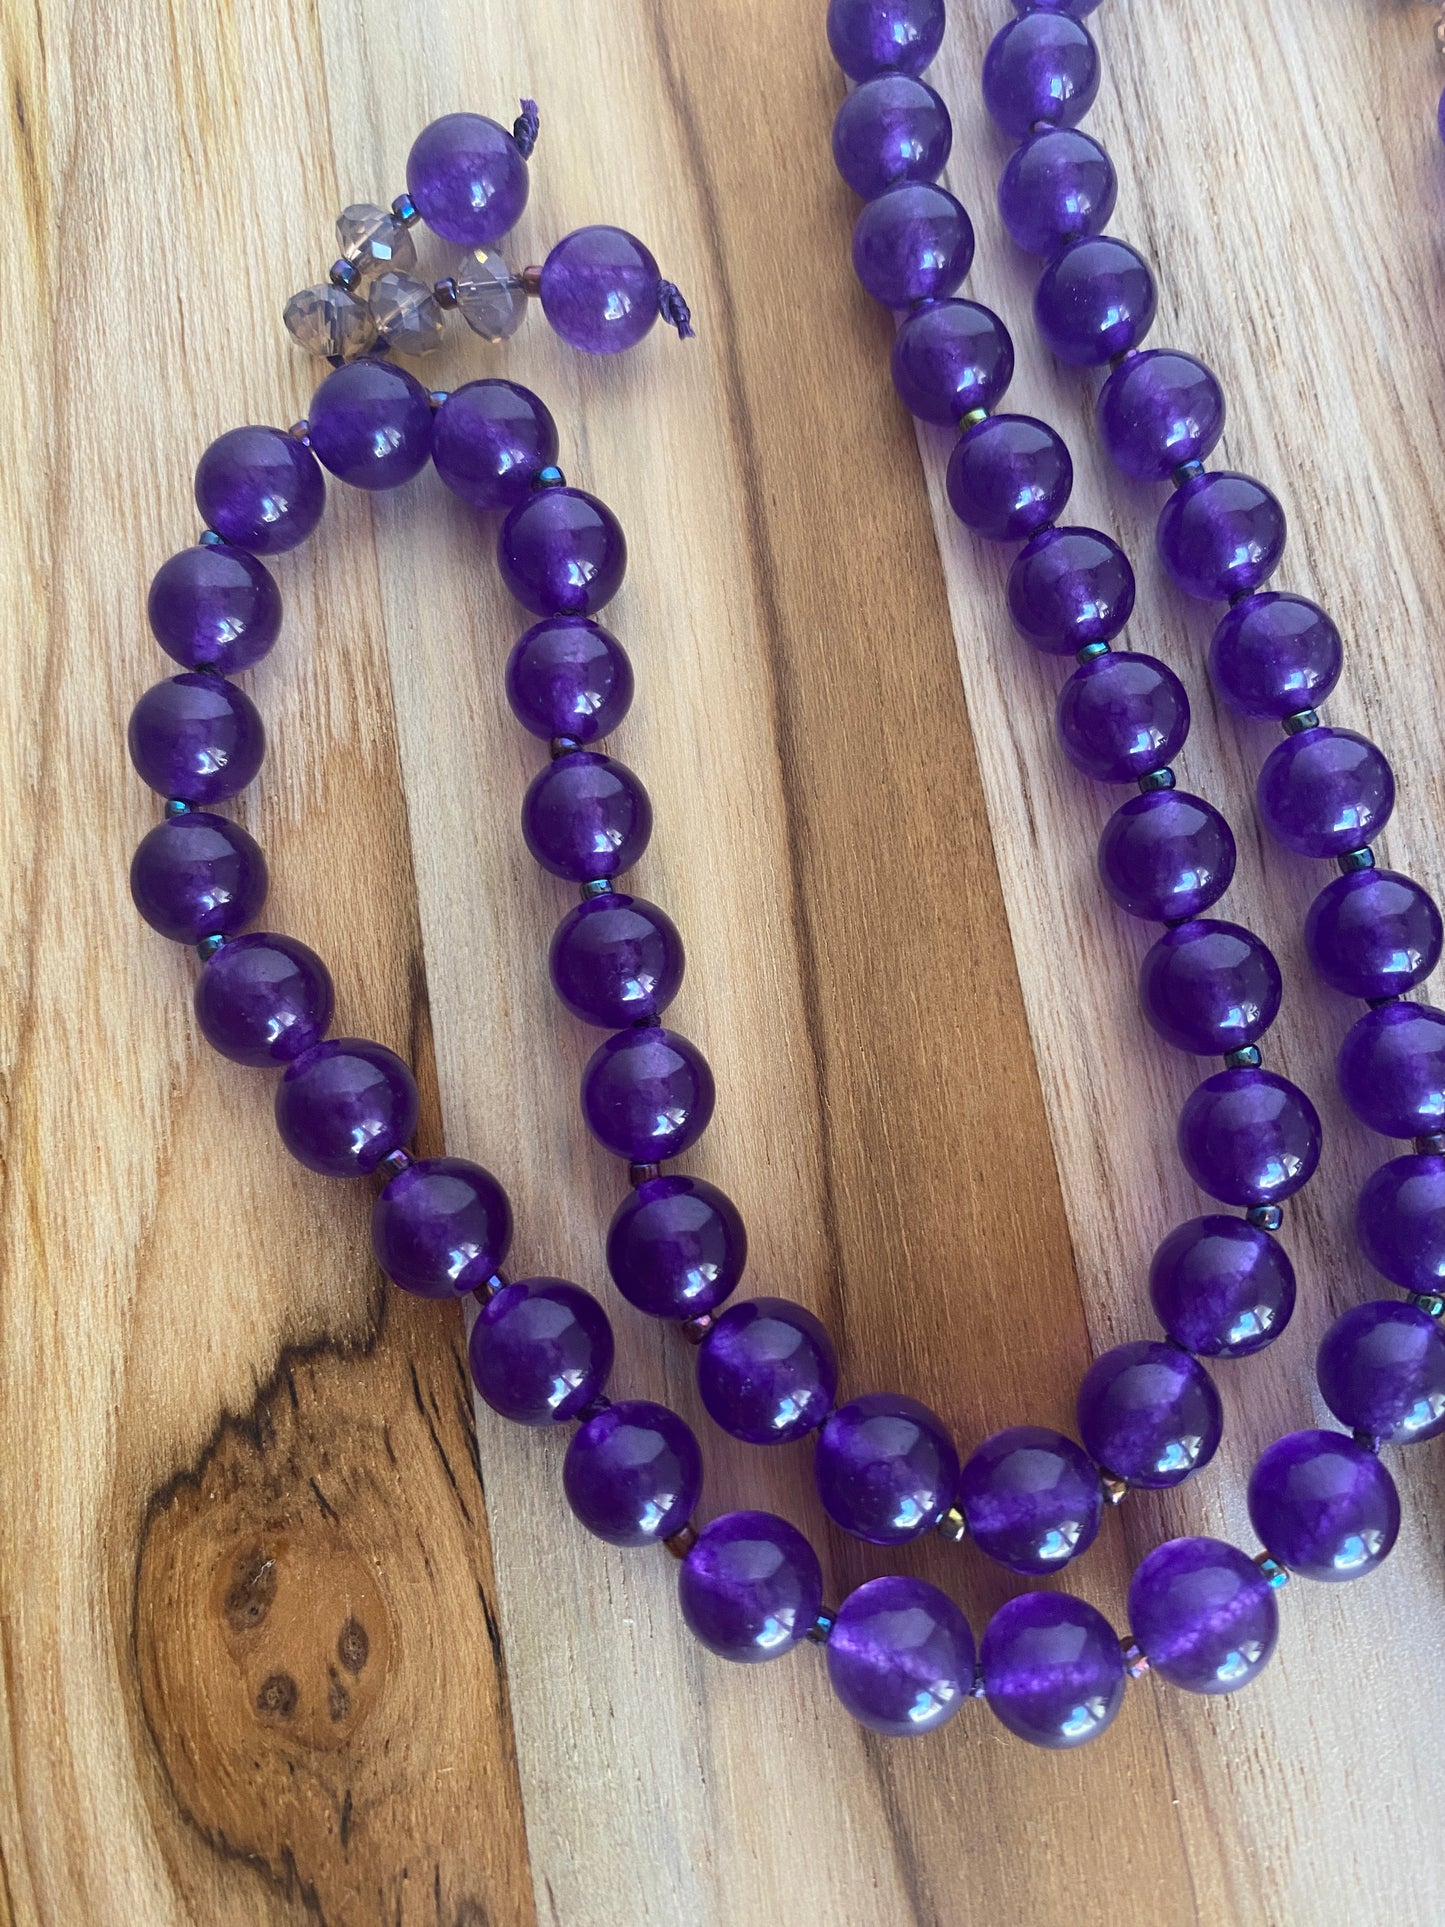 28" Long Dragon Vein Agate Cross Beaded Necklace with Purple Beads